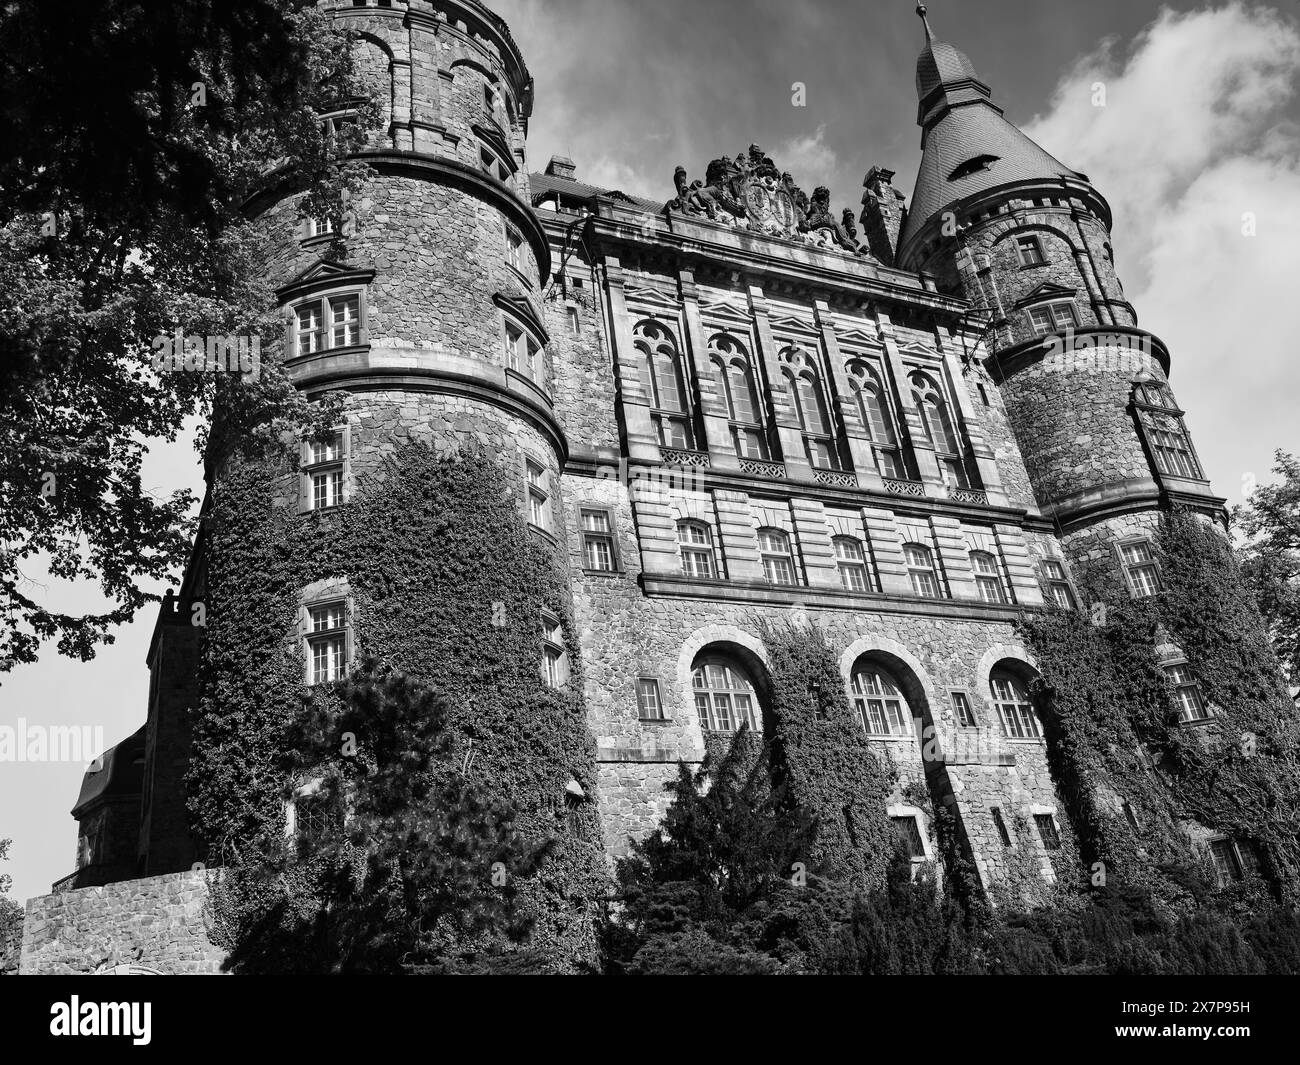 Sightseeing mediewal historic Castle in Ksiaz, Poland. Stock Photo